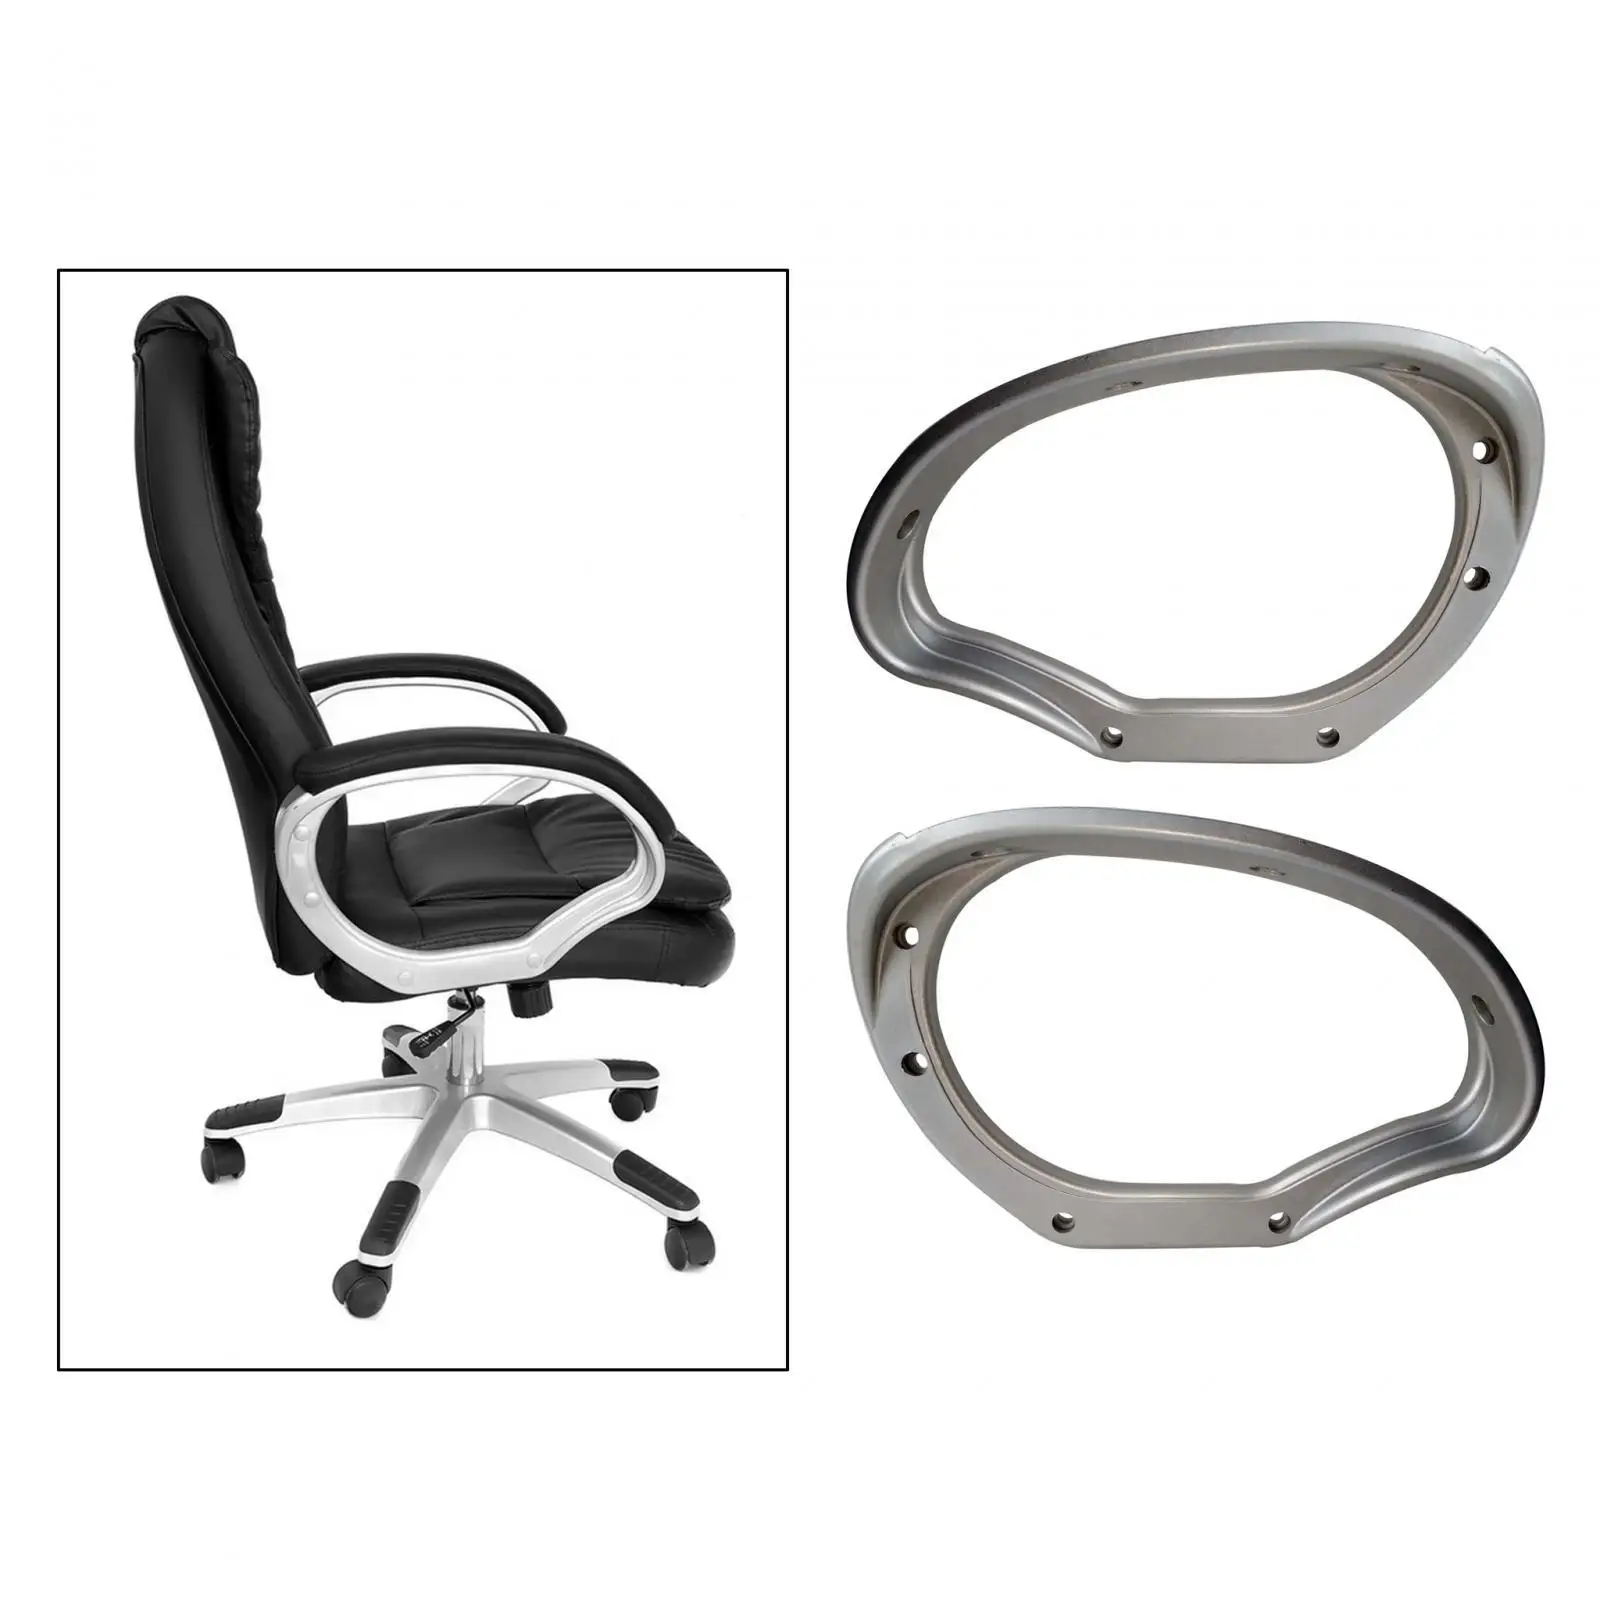 2Pcs Chair Armrest Repair Accessories Universal Office Computer Chair Handle Bracket for Swivel Lifting Chair Home Office Chair